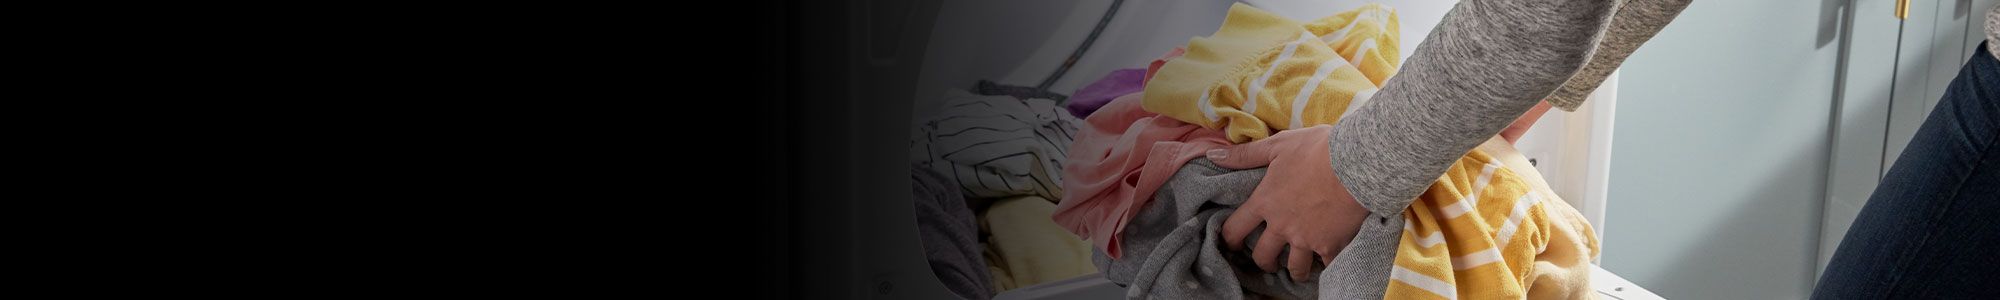 Get clothes clean, fast with a Whirlpool® laundry machine.